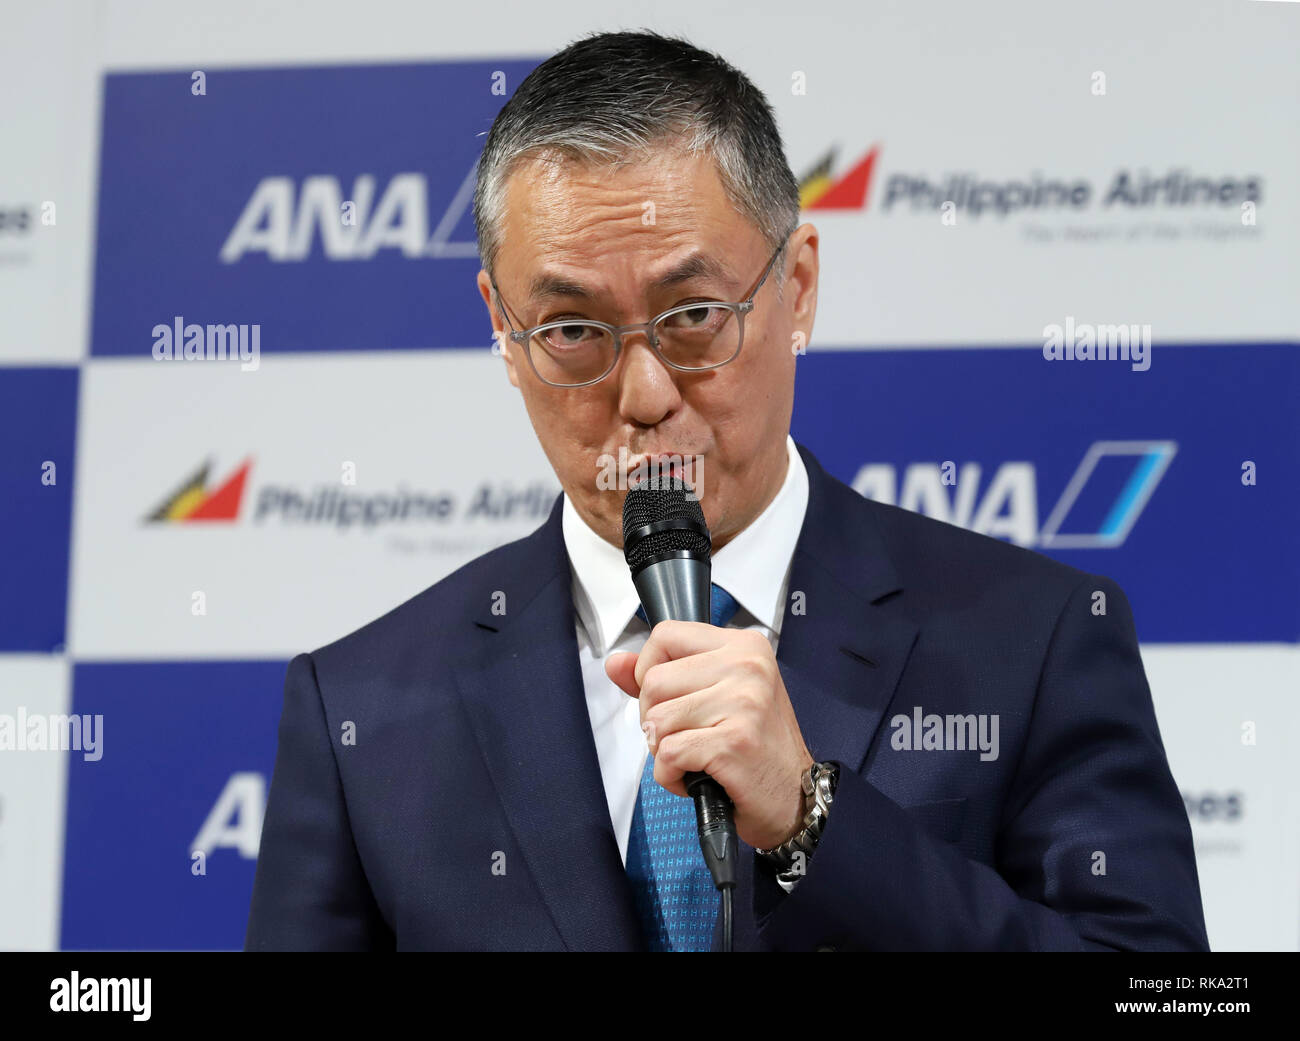 Tokyo, Japan. 8th Feb, 2019. LT Group president and PAL Holdings director Michael Tan announces Philippine Airlines (PAL) and All Nippon Airways (ANA) expand their partnerships in Tokyo on Friday, February 8, 2019. ANA Holdings will invest 95 million U.S. dollars to PAL Holdings and acquire 9.5 percent of PAL Holdings shares. Credit: Yoshio Tsunoda/AFLO/Alamy Live News Stock Photo